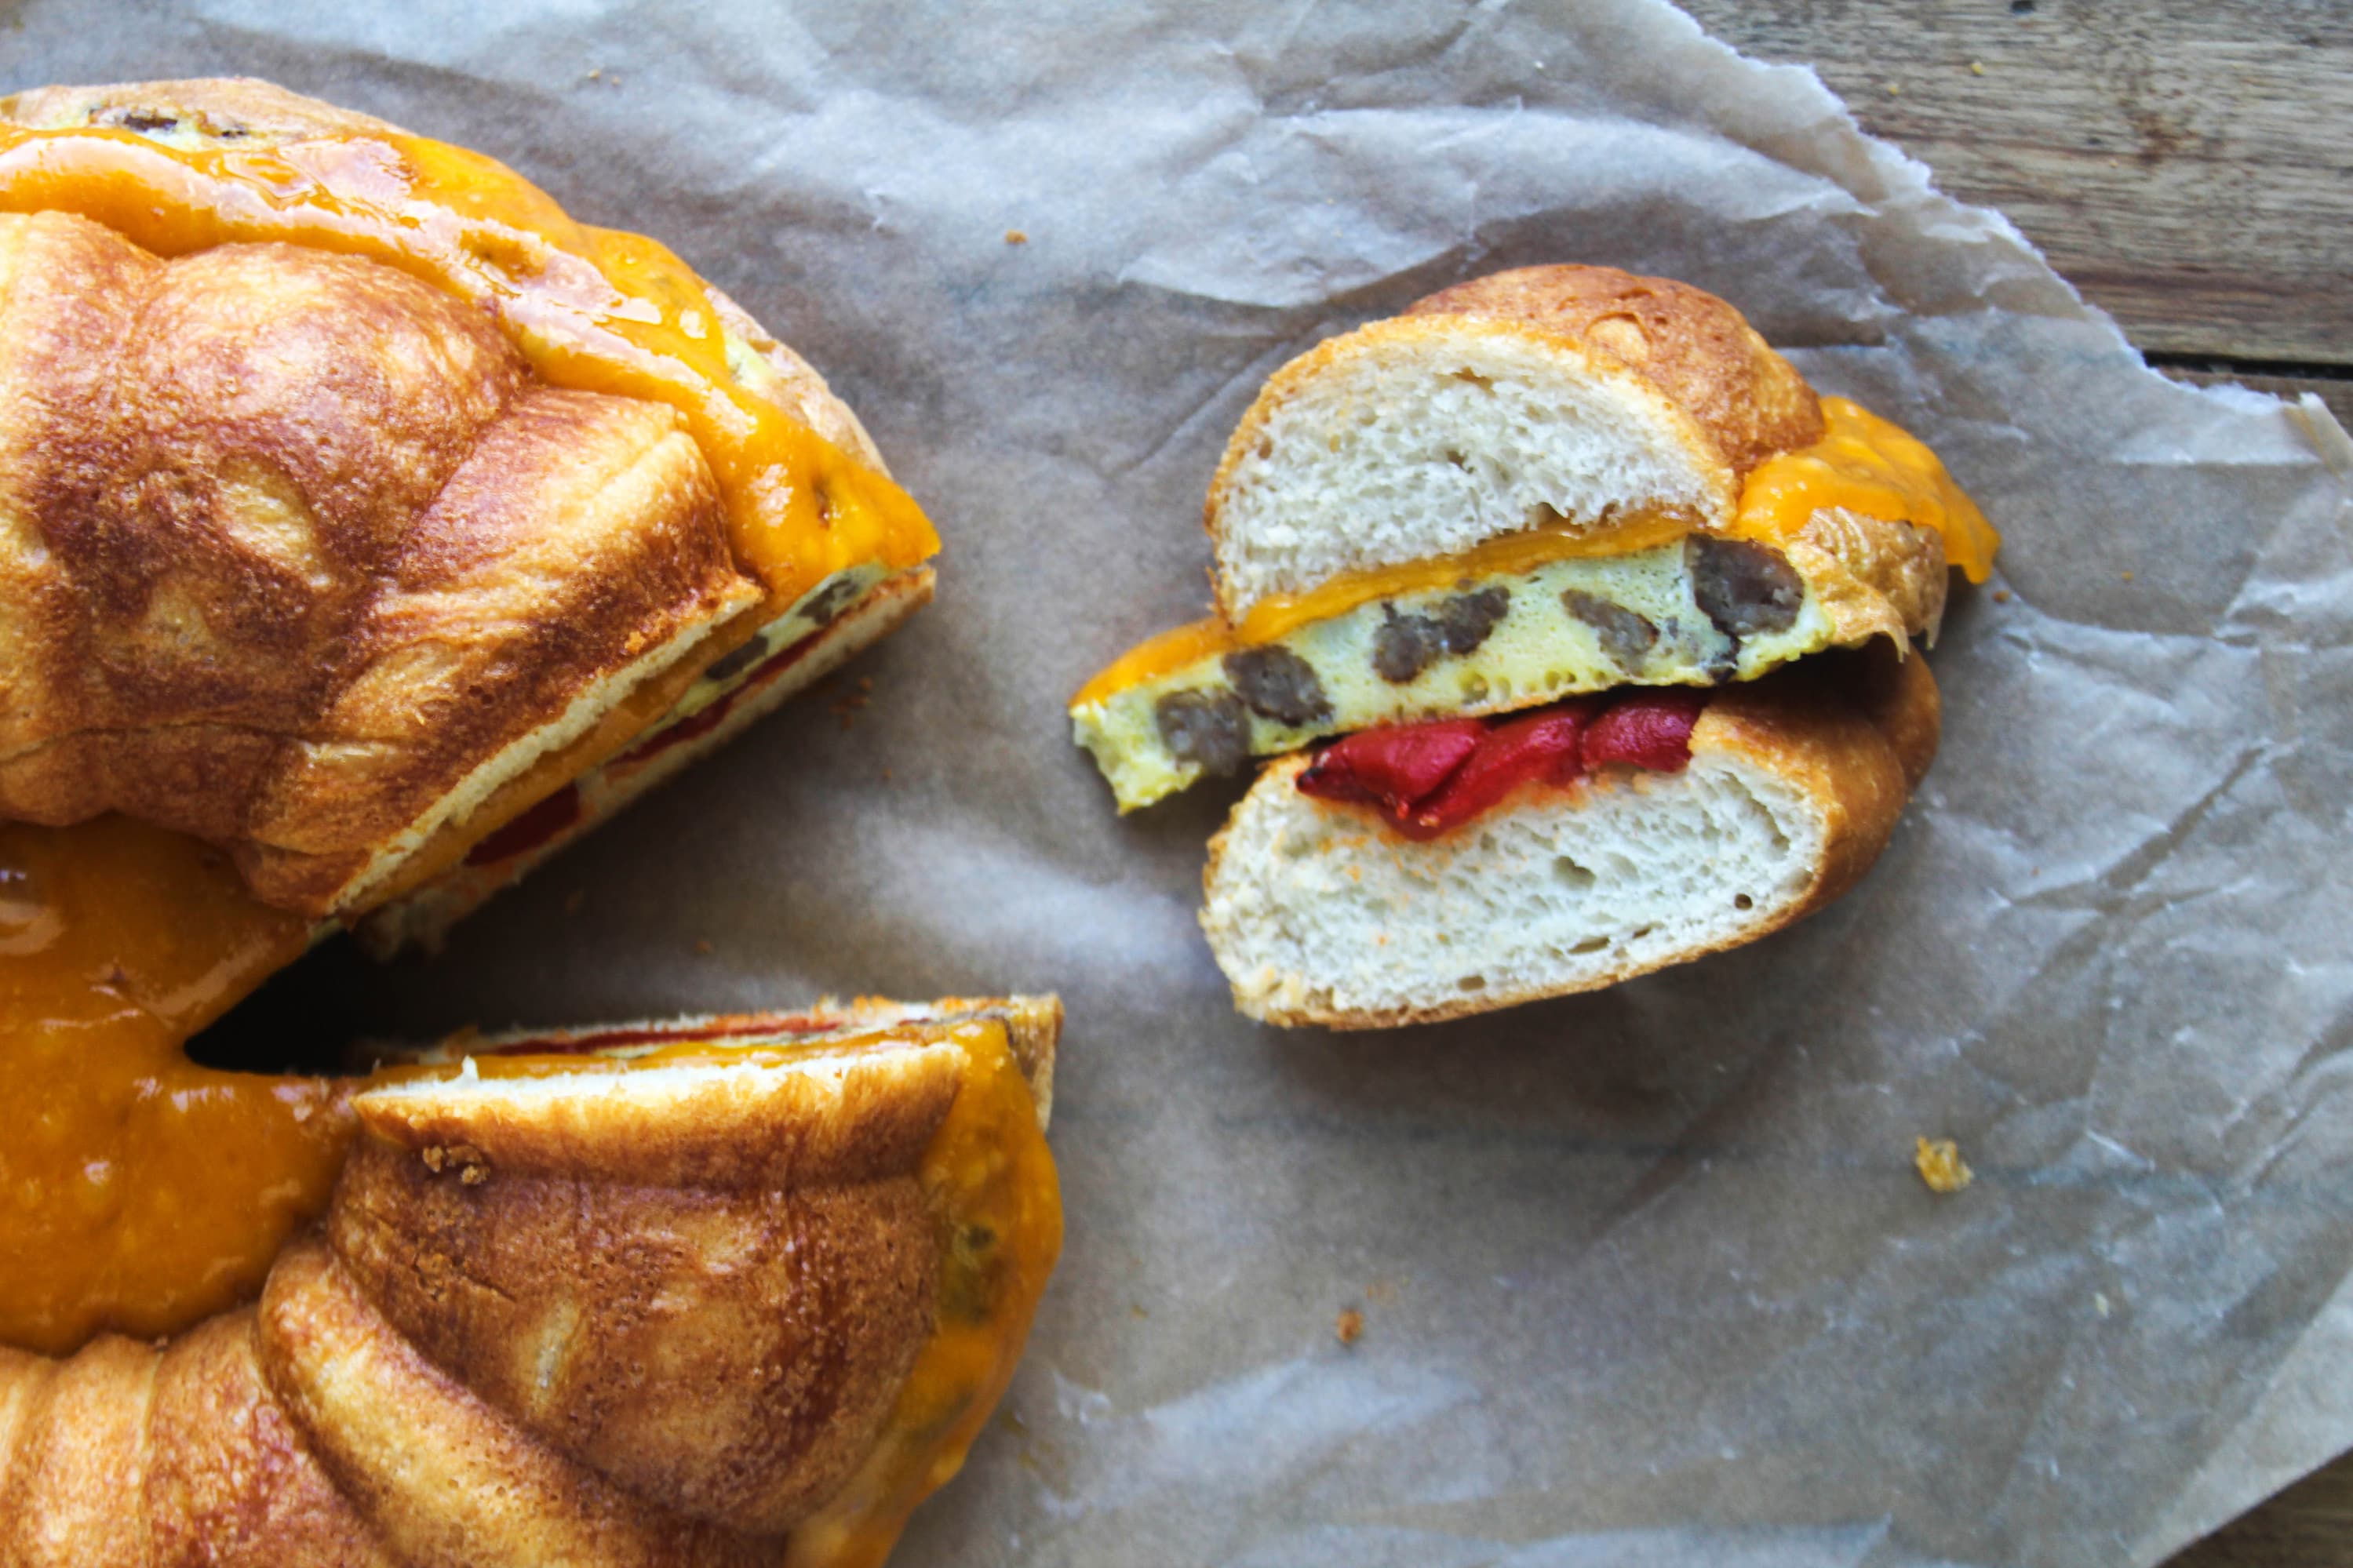 Step up your breakfast sandwich game with accessories